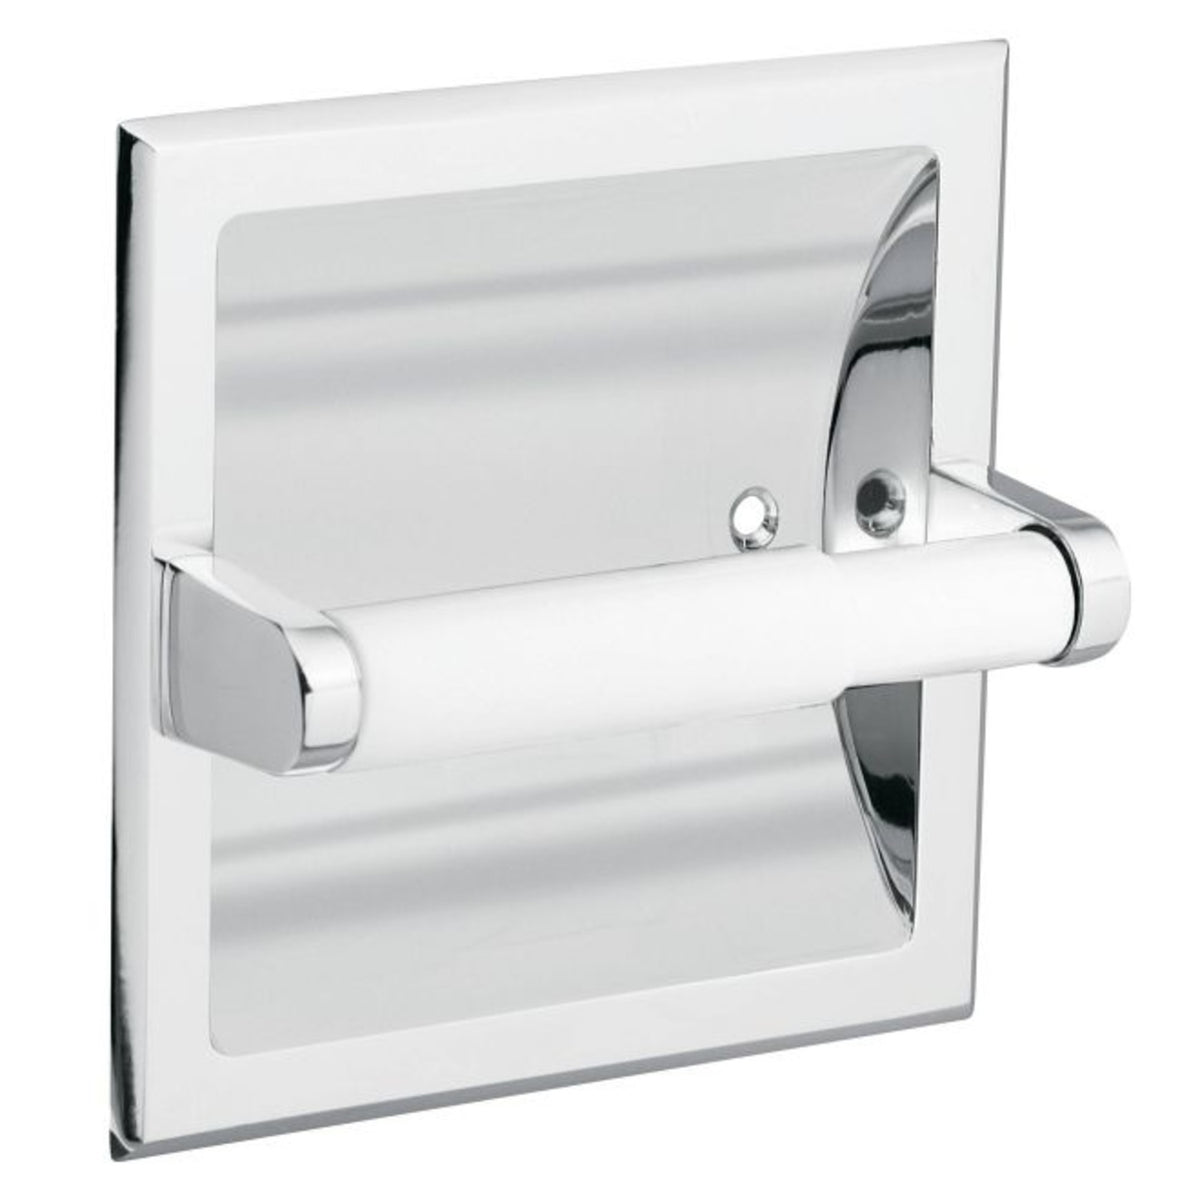 Moen 1576SS Commercial Recessed Paper Holder, Satin Stainless Steel